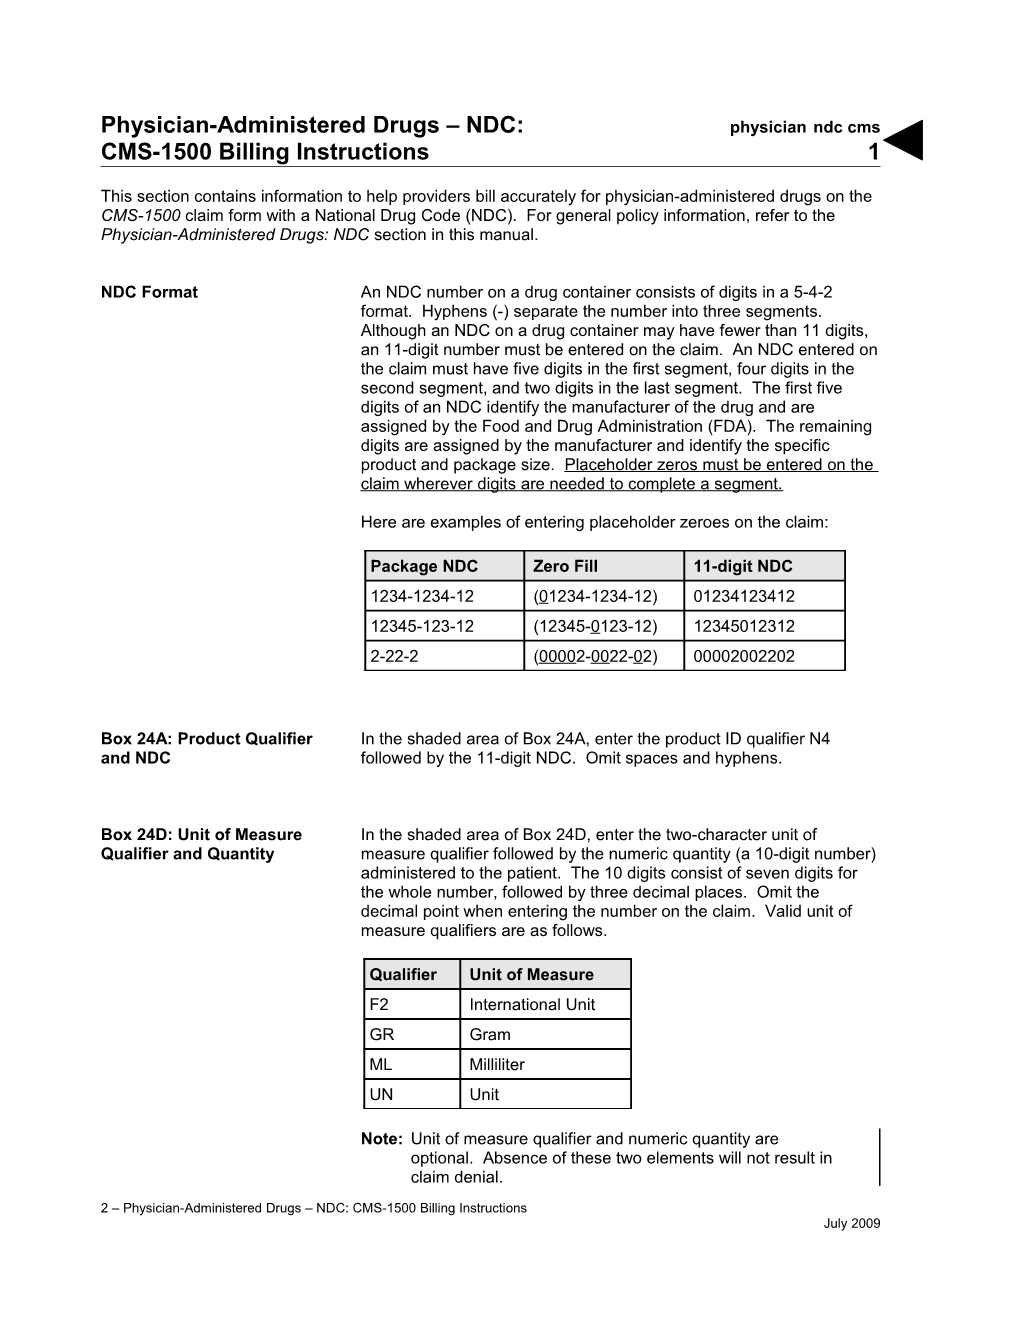 Physician-Administered Drugs NDC: CMS-1500 Billing Instructions (Physician Ndc Cms)